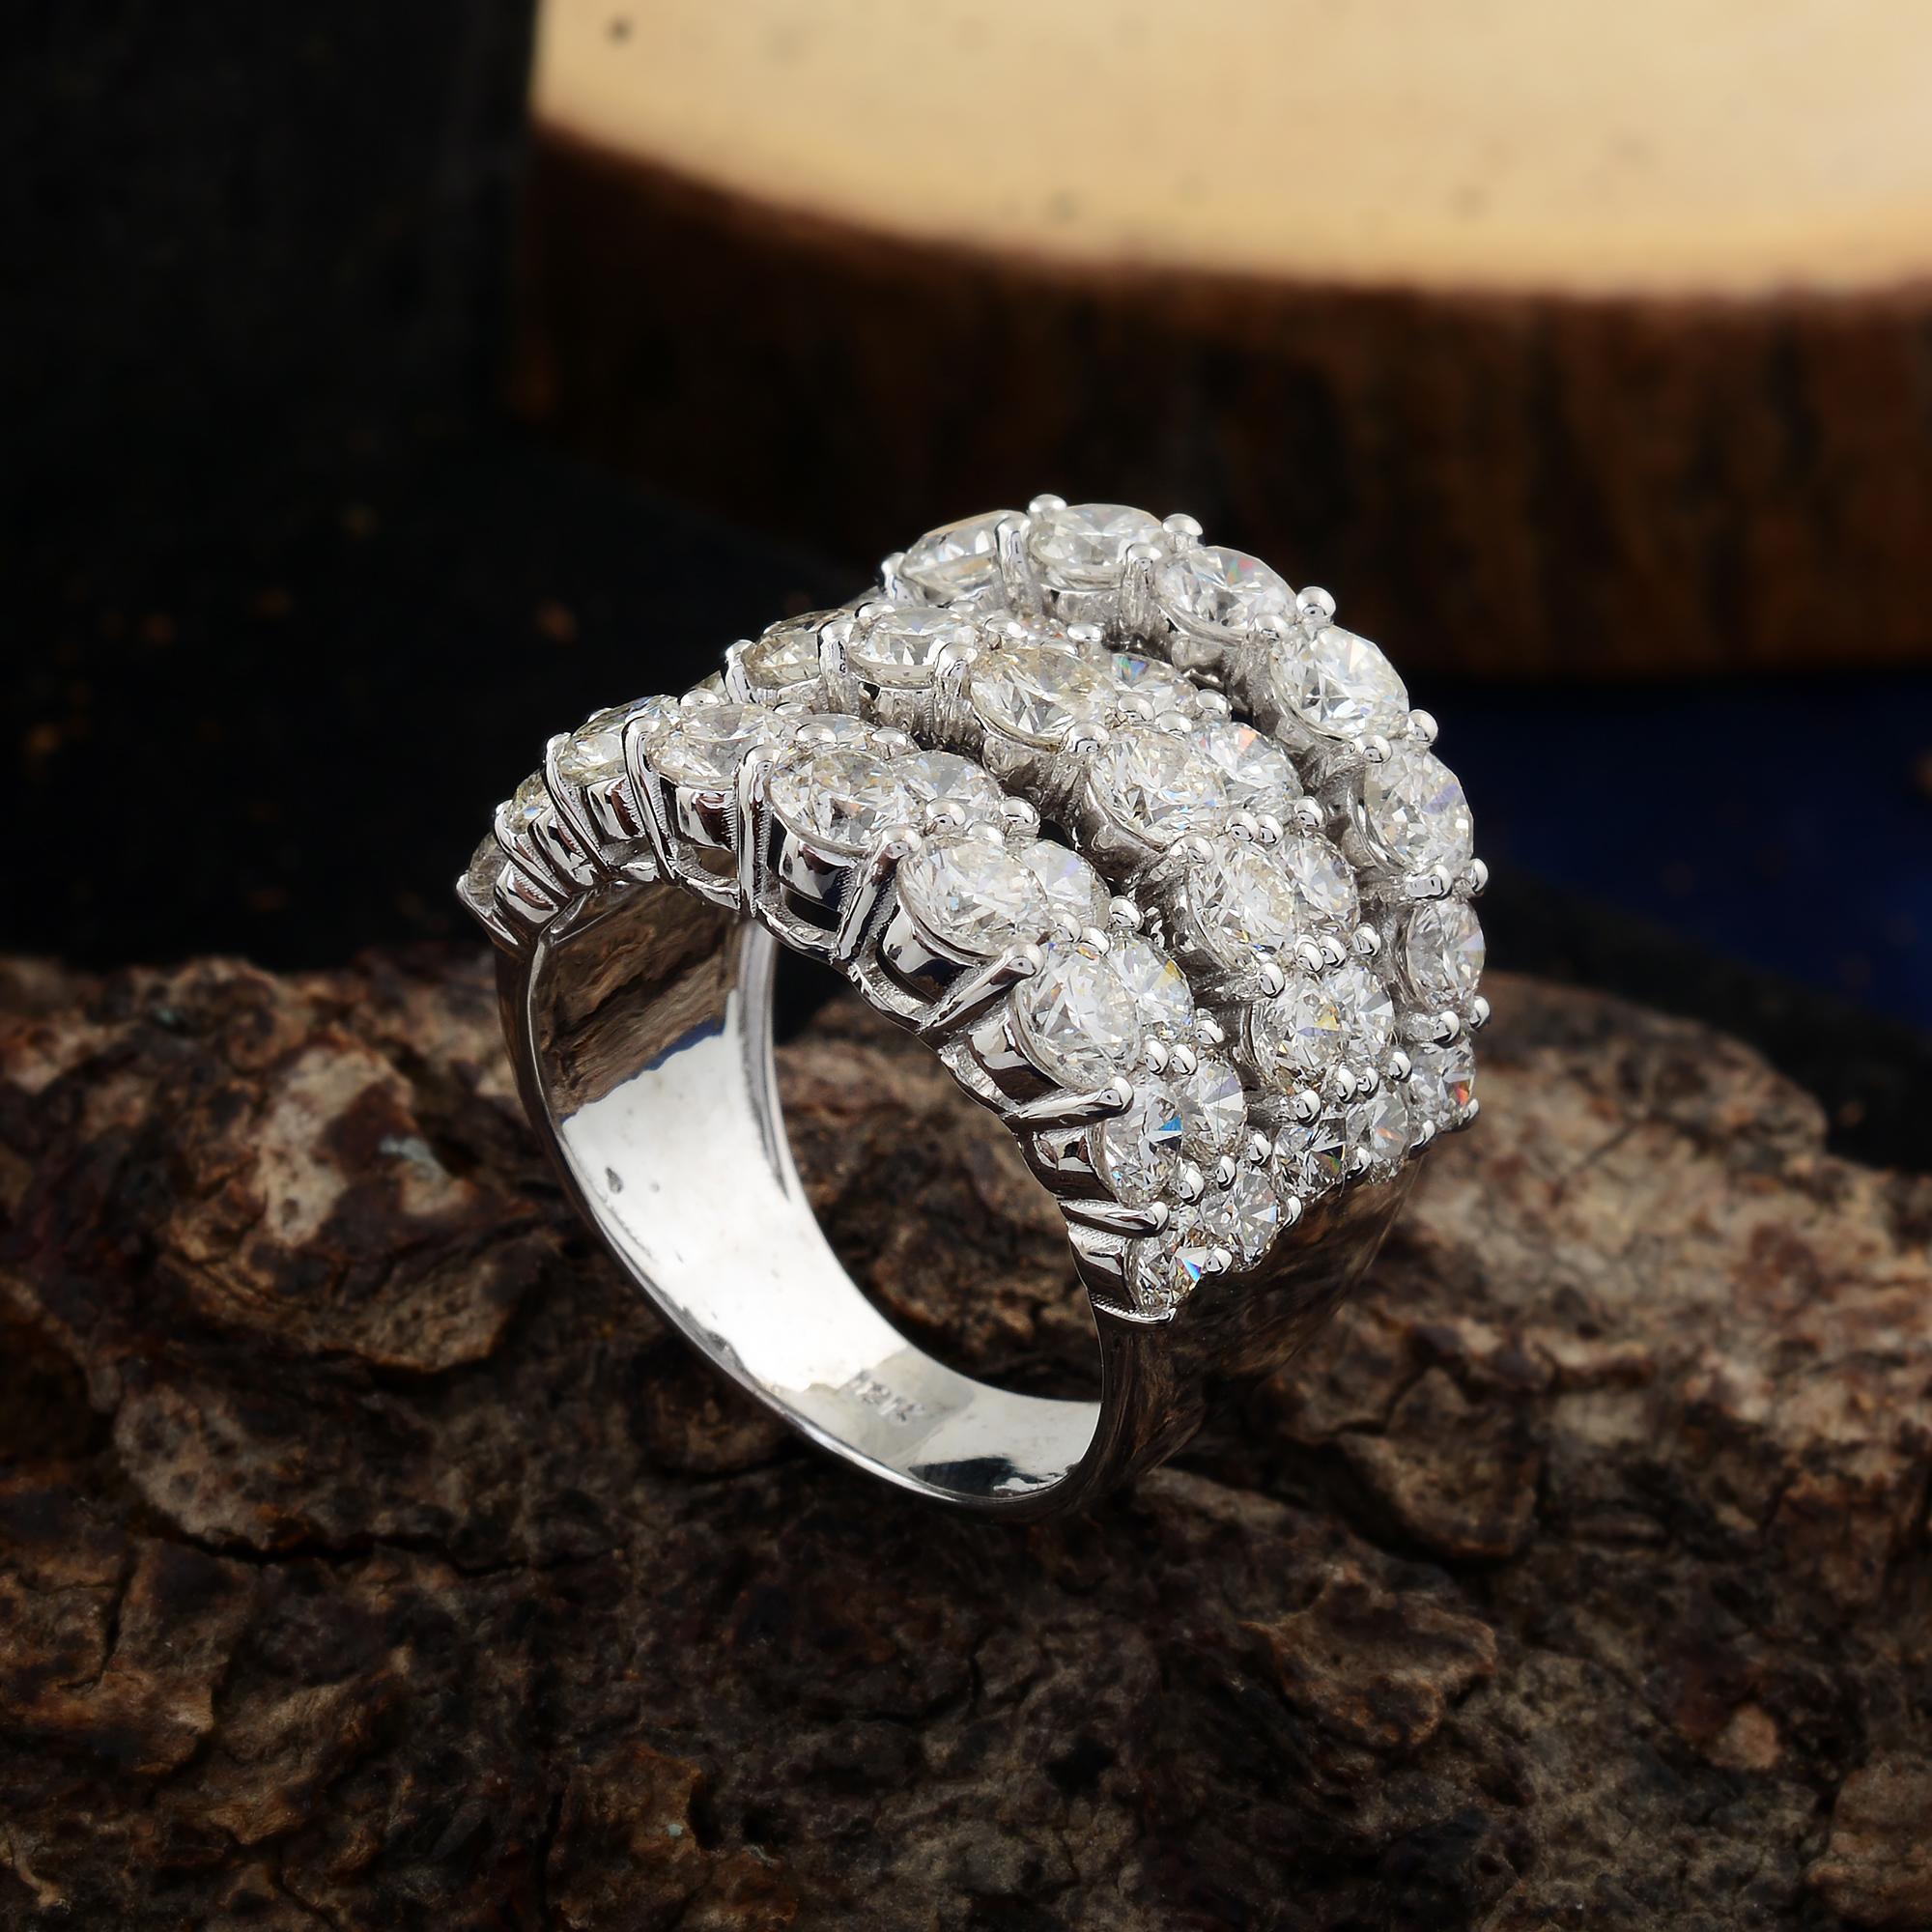 For Sale:  Natural 5.75 Carat Diamond Multi Layer Dome Ring Solid 18k White Gold Jewelry 5